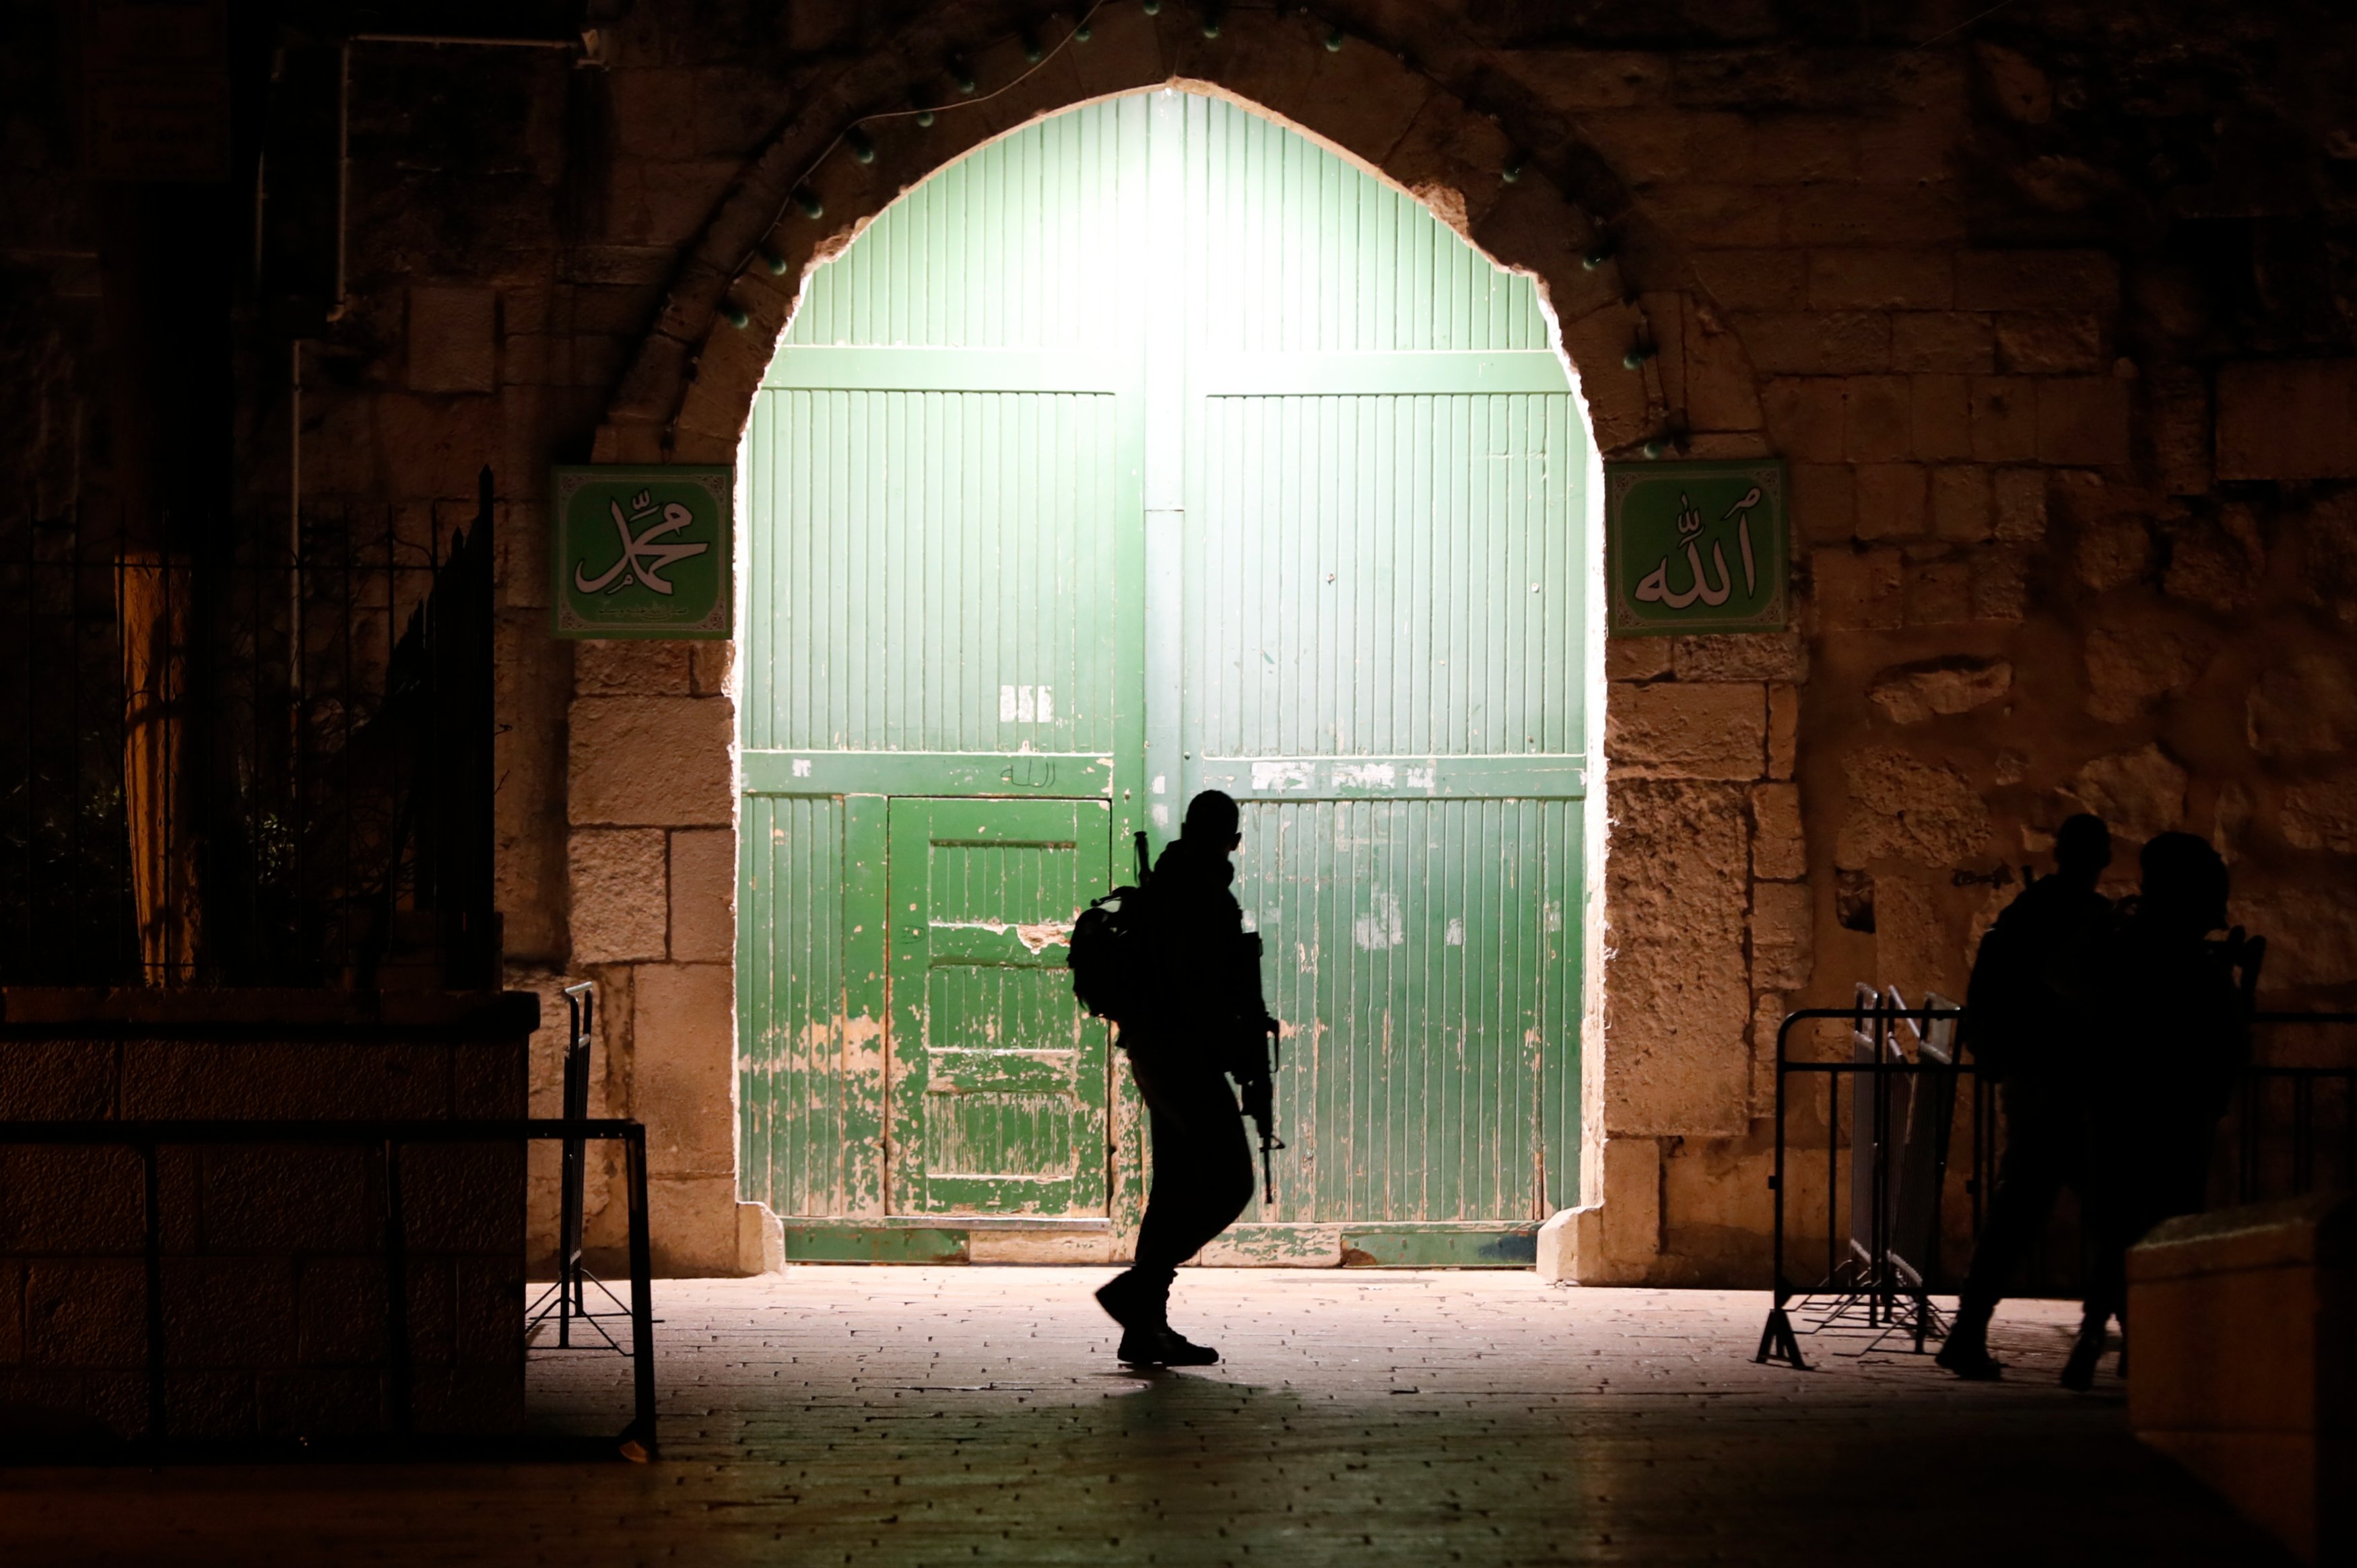 Israeli border guards patrol an entrance to the al-Aqsa compound in Jerusalem's Old City on 19 February 2019 (AFP)